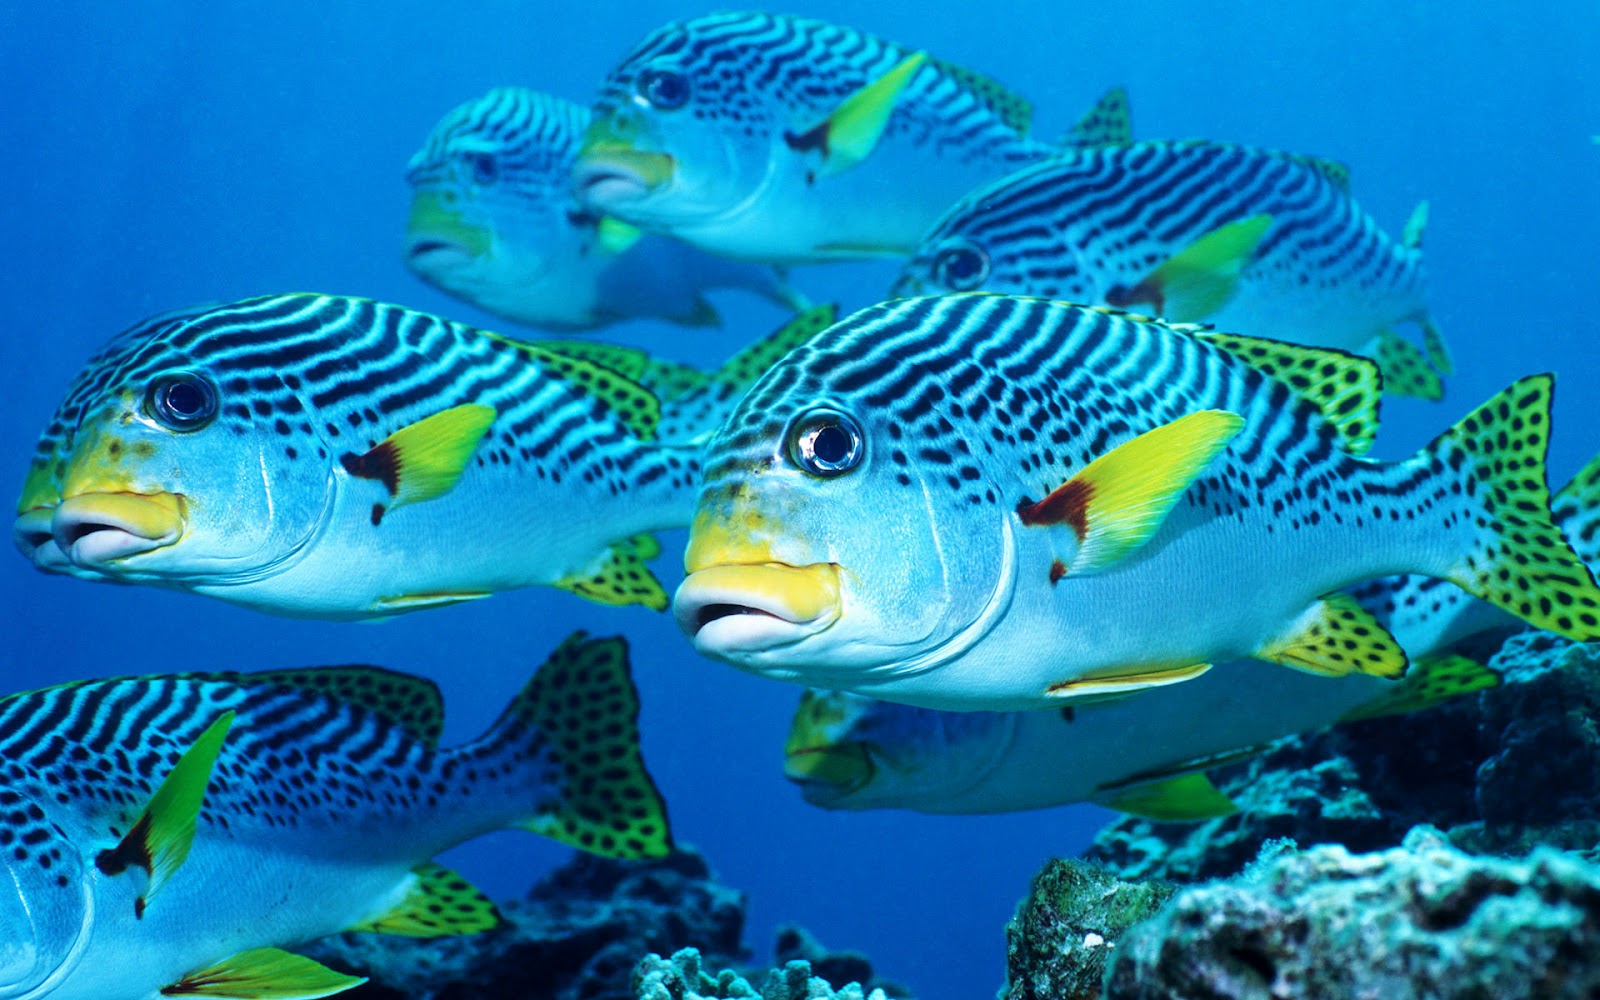 Ocean life wallpapers marine life on the seabed like fish plants